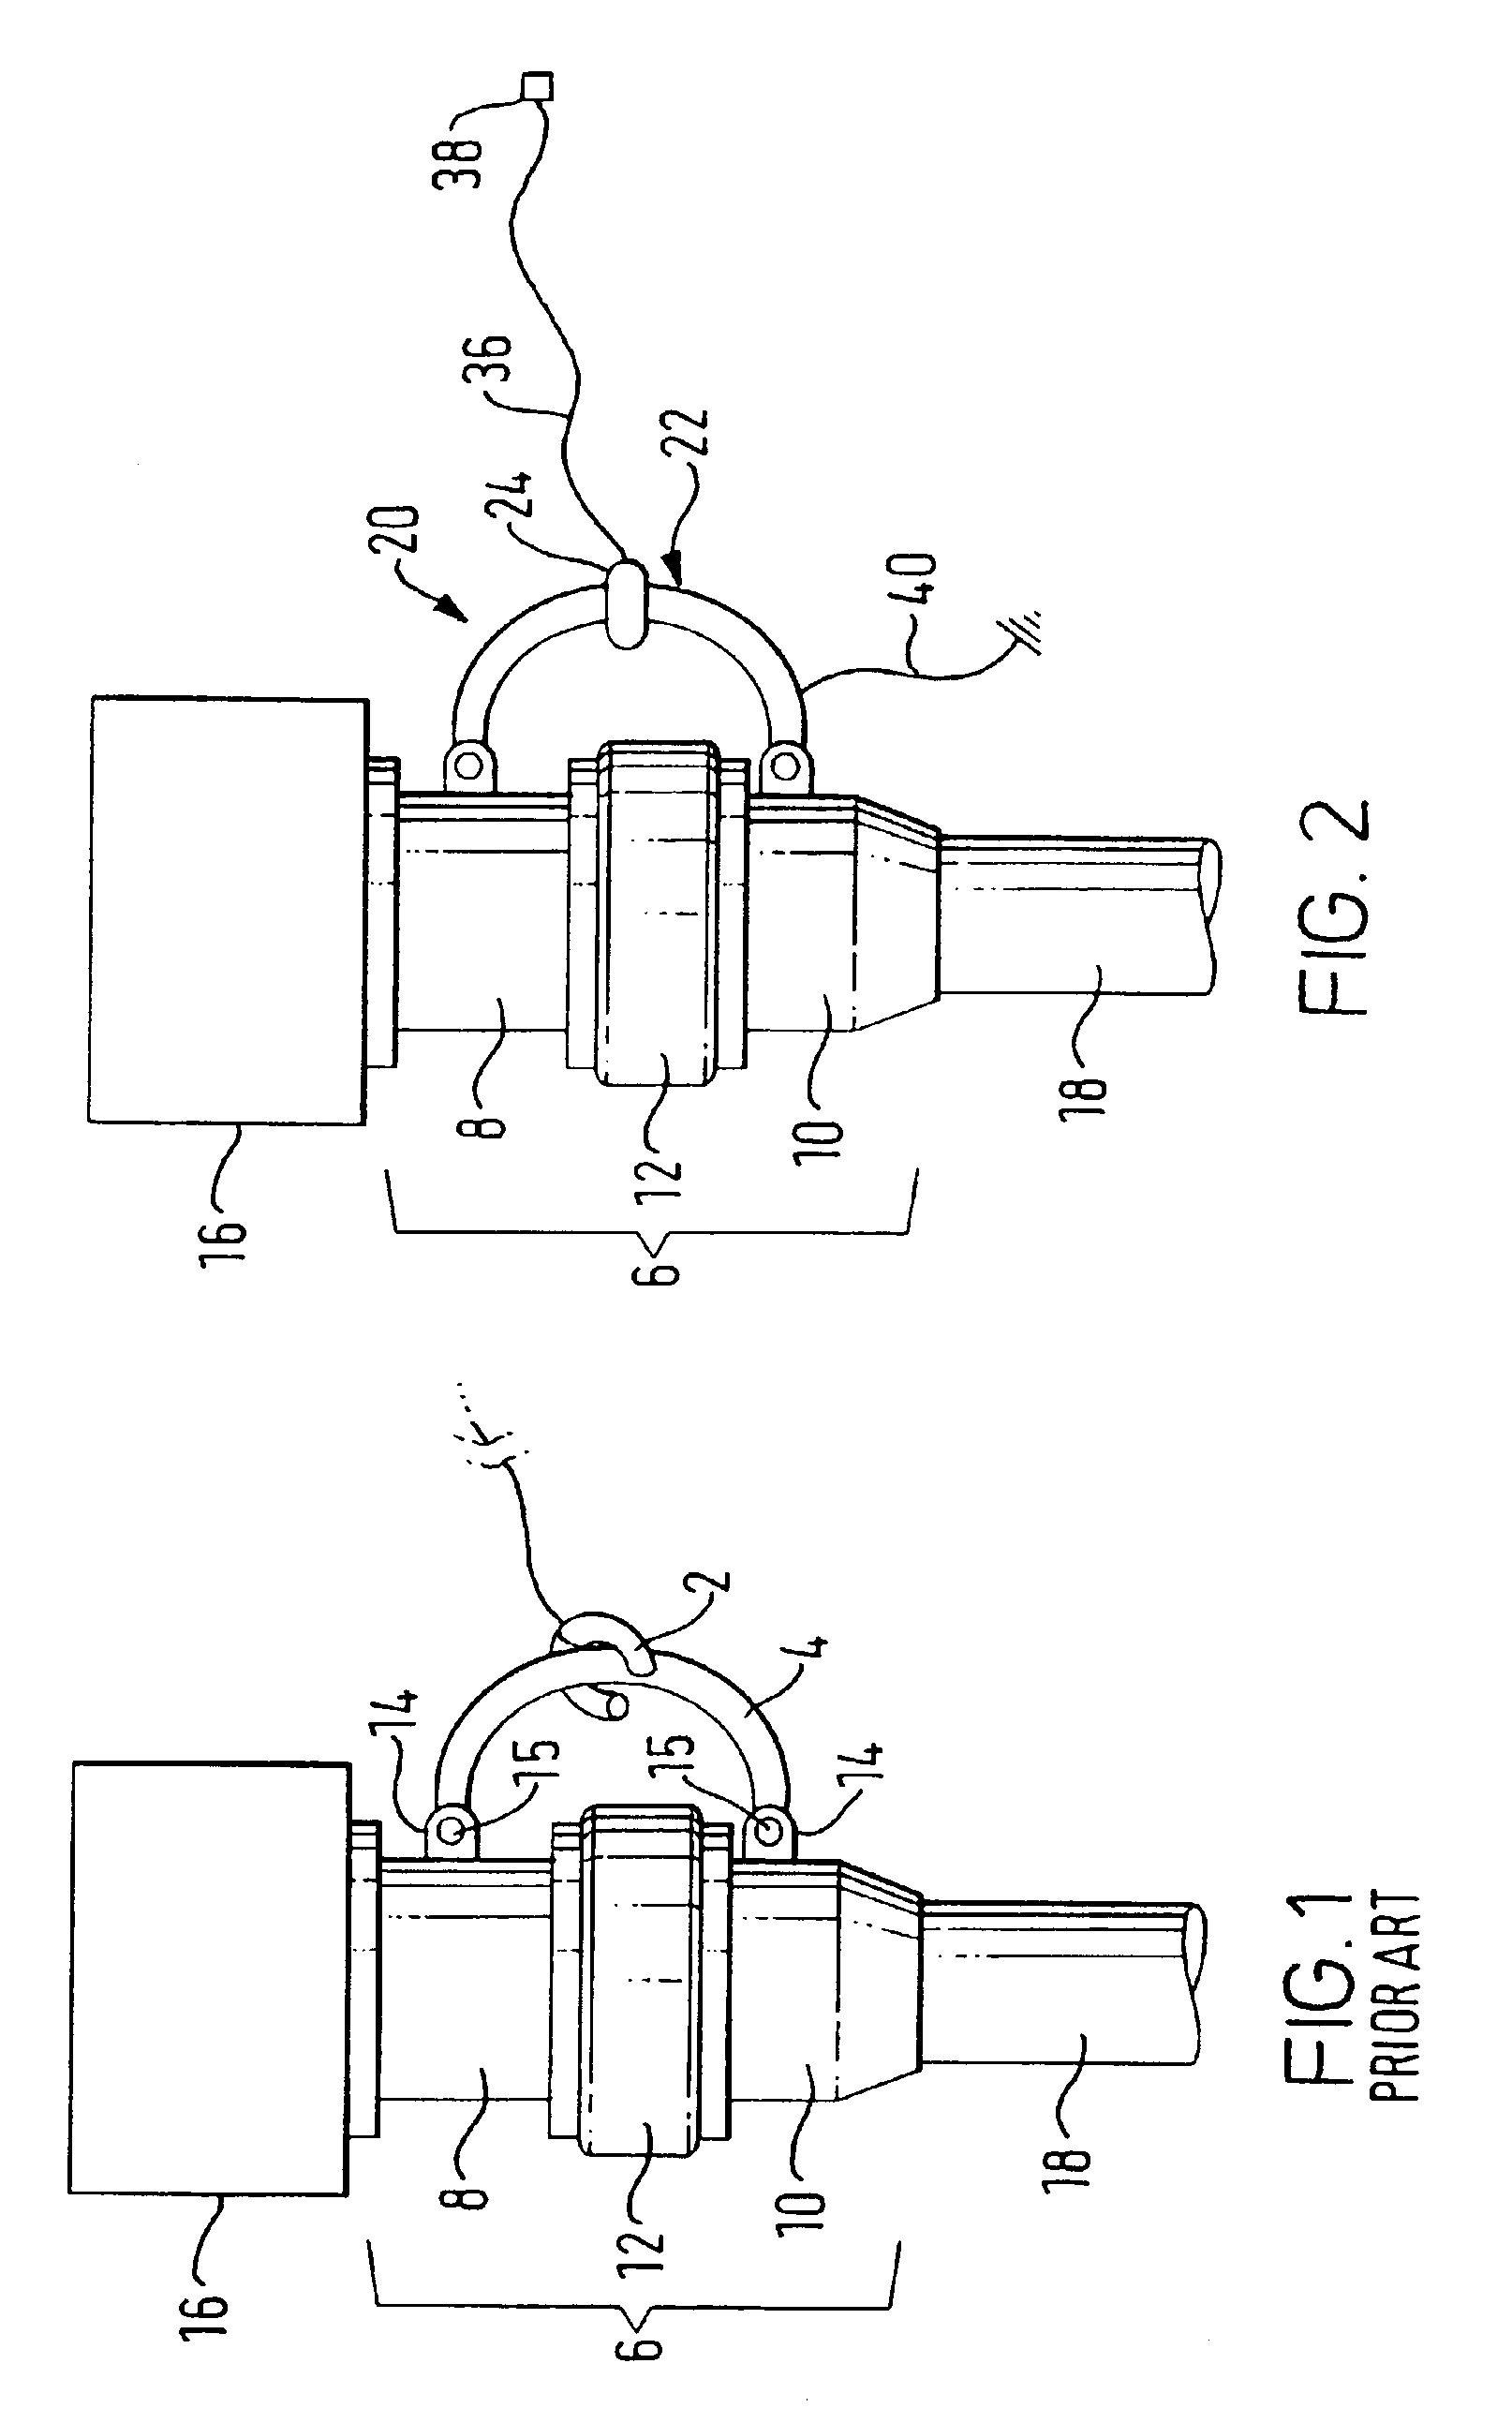 Partial discharge detection test link, partial discharge detection system and methods for detecting partial discharge on a power cable